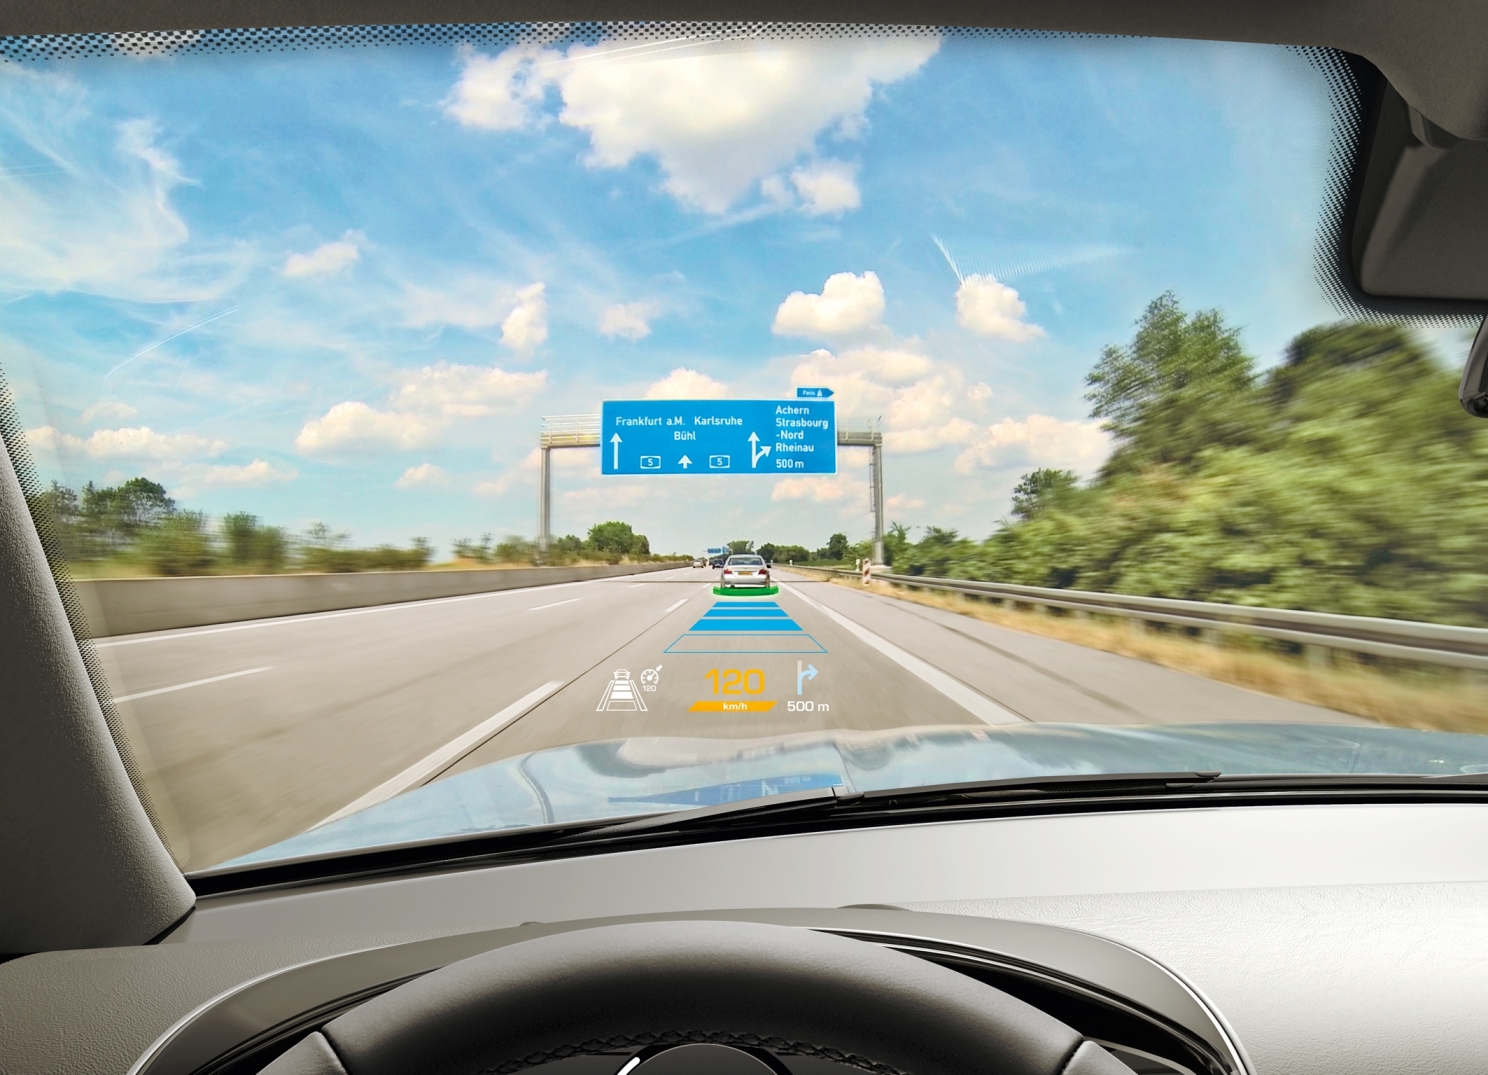 Continental jumps on the augmented reality bandwagon